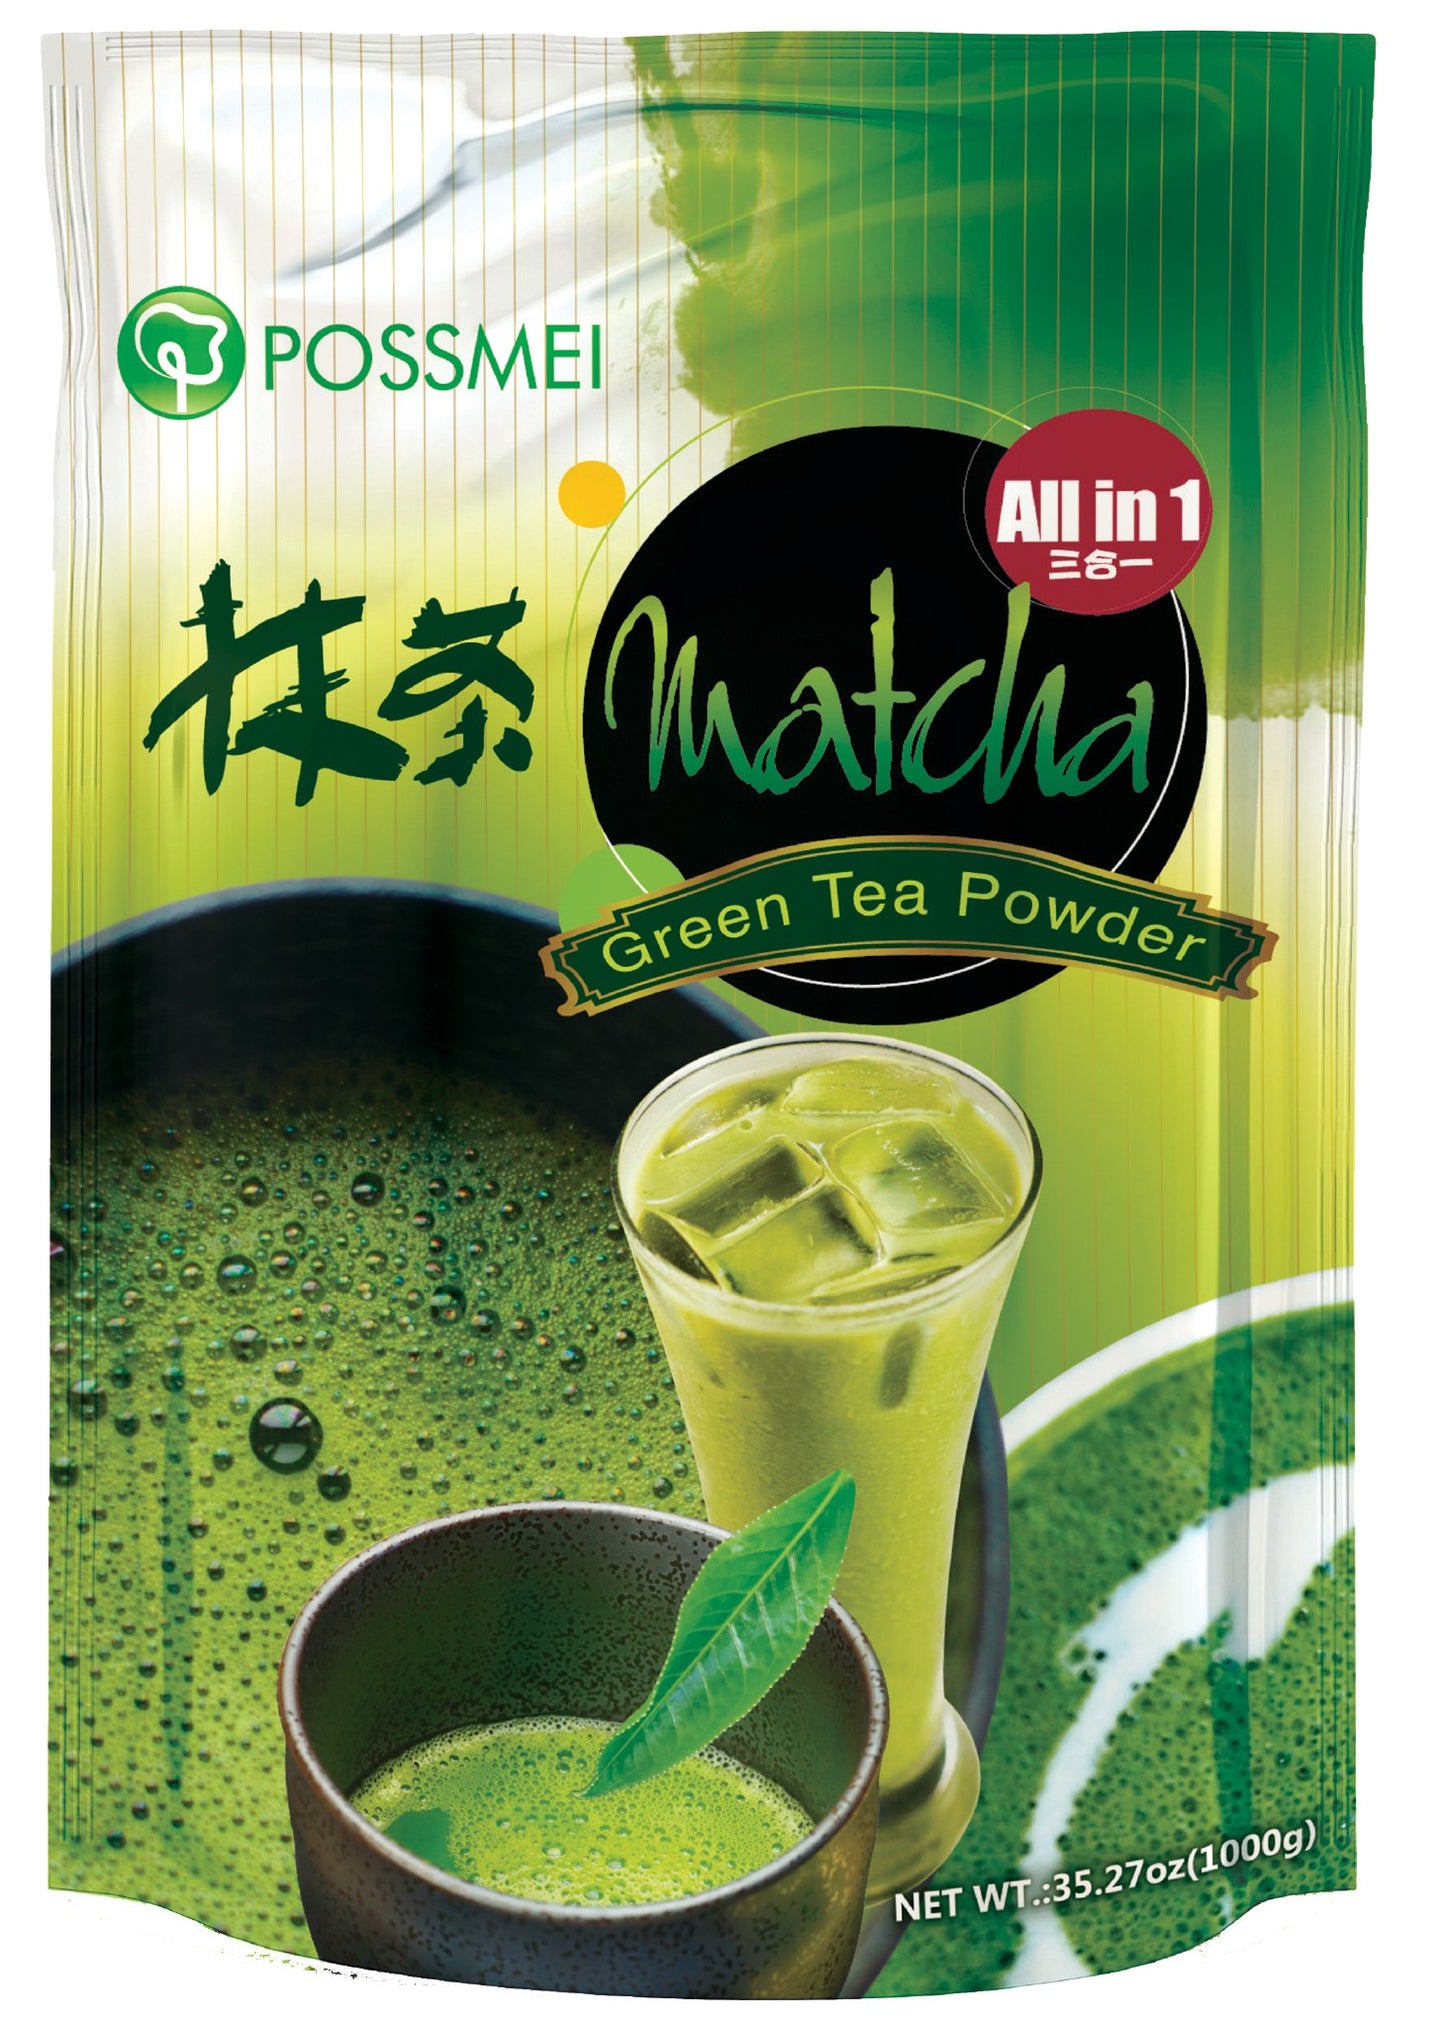 Possmei Instant Matcha Green Tea Powder (All-In-One)